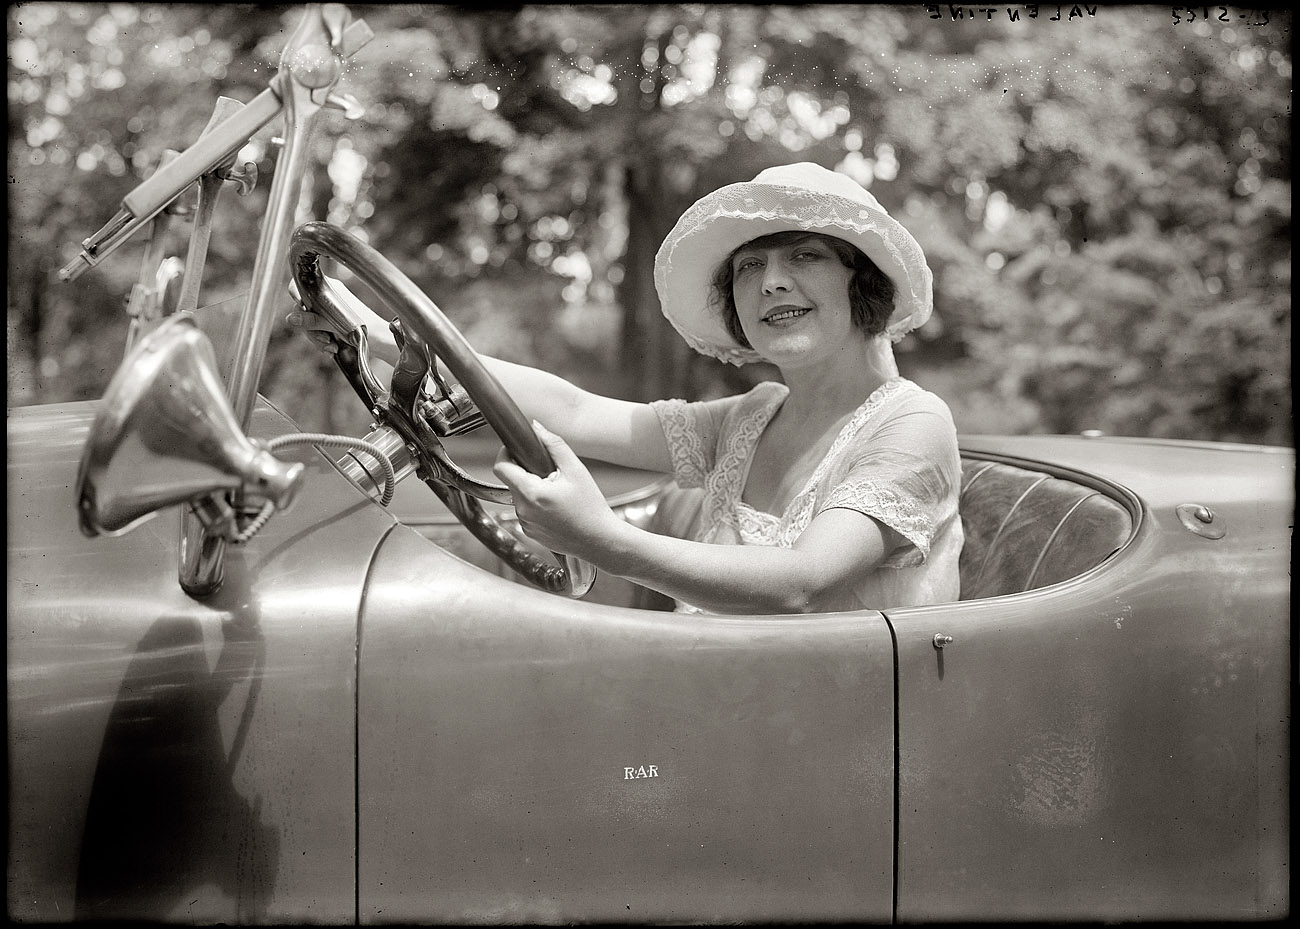 The film and stage actress Grace Valentine circa 1920 at the wheel of an enormous roadster. View full size. 5x7 glass negative, George Grantham Bain Collection.